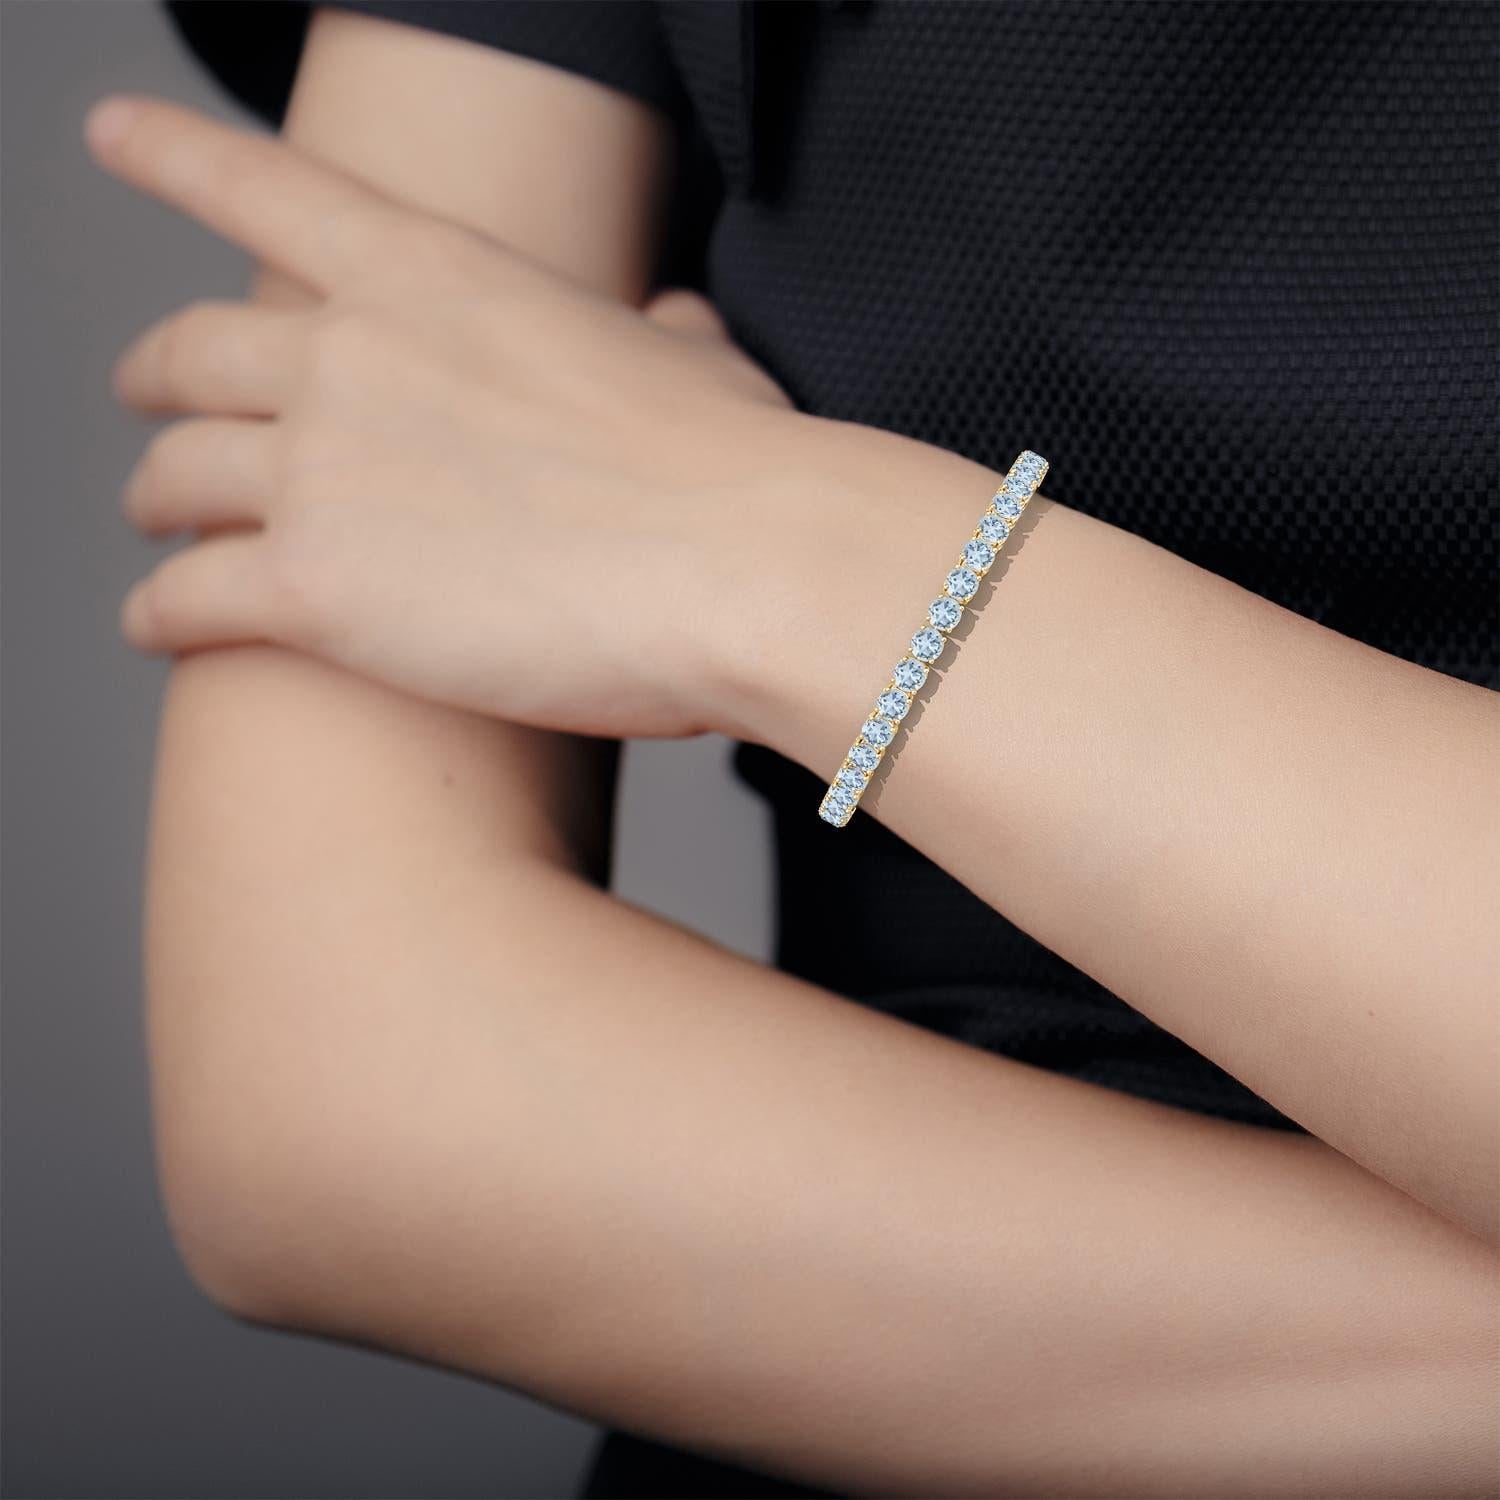 This aquamarine tennis bracelet exudes pure elegance. The prong-set round gems allure with their cool blue hue. This eternity bracelet is crafted in 14k yellow gold and secures with a catch clasp.